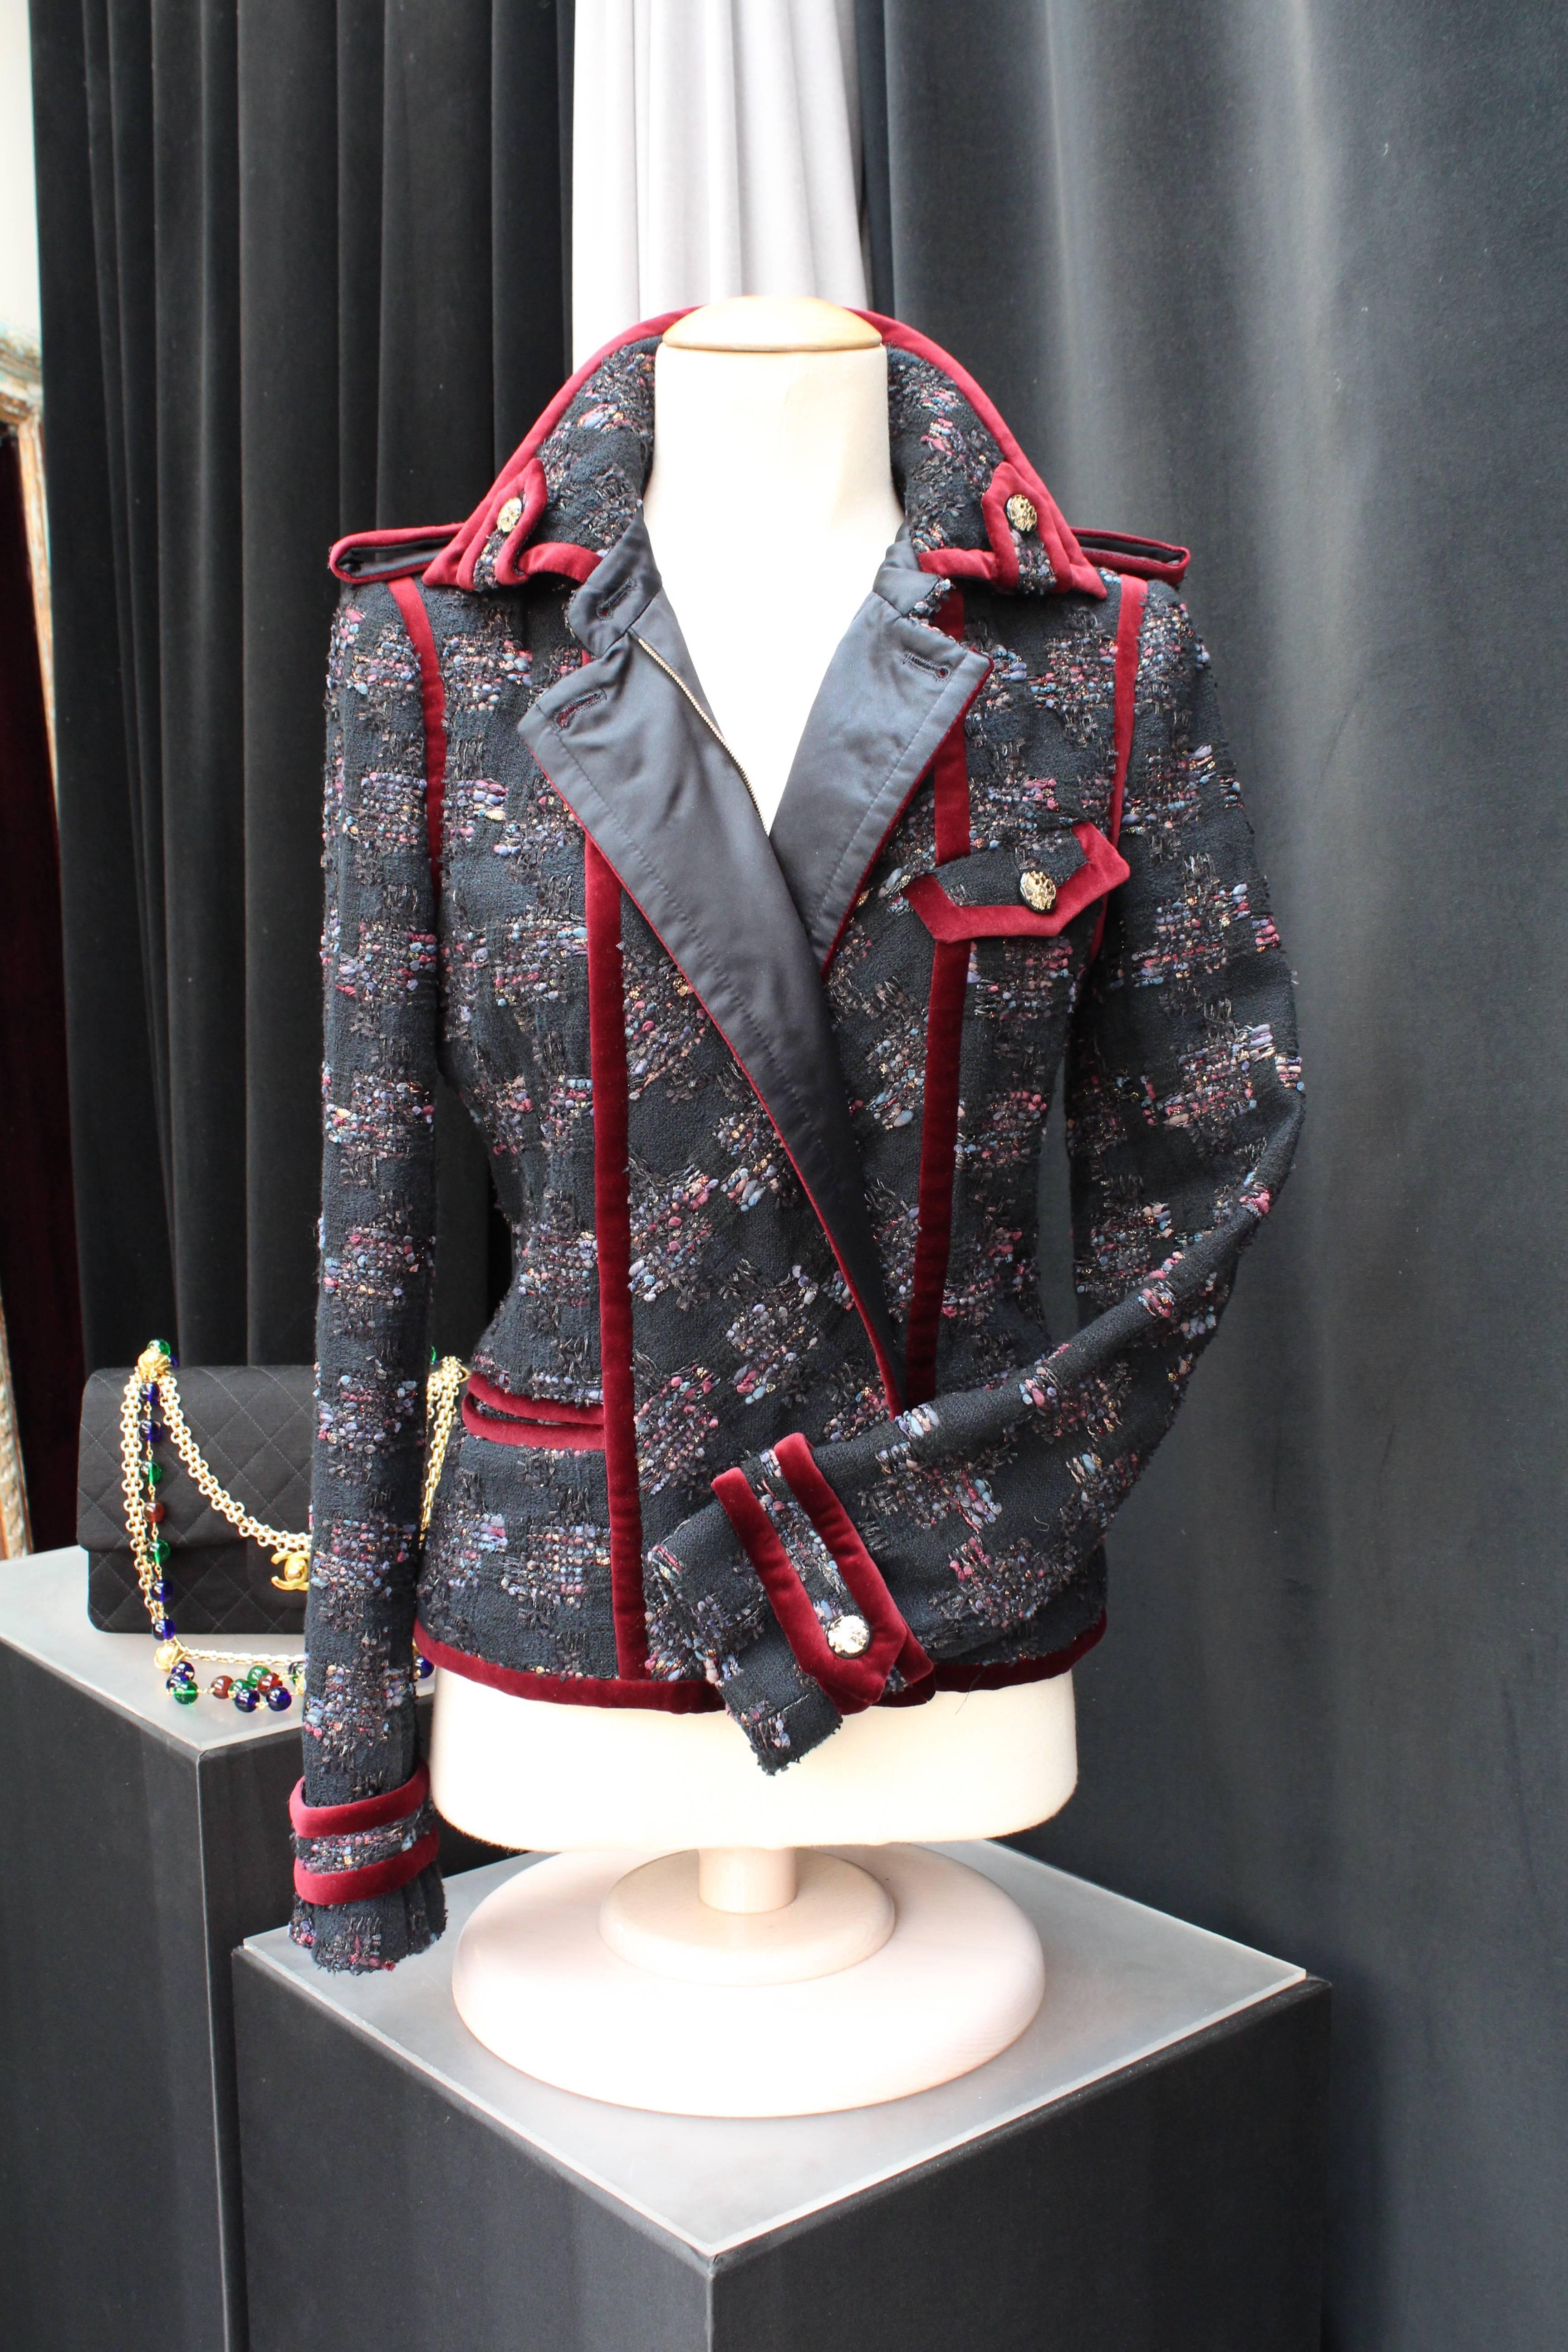 CHANEL (Made in France) Officer style jacket comprising of black woolen tweed interlaced with red, blue and gold wool threads and adorned with burgundy velvet galloons from the Pre-Fall 2009 collection Paris-Moscow. 

The jacket fastens in the